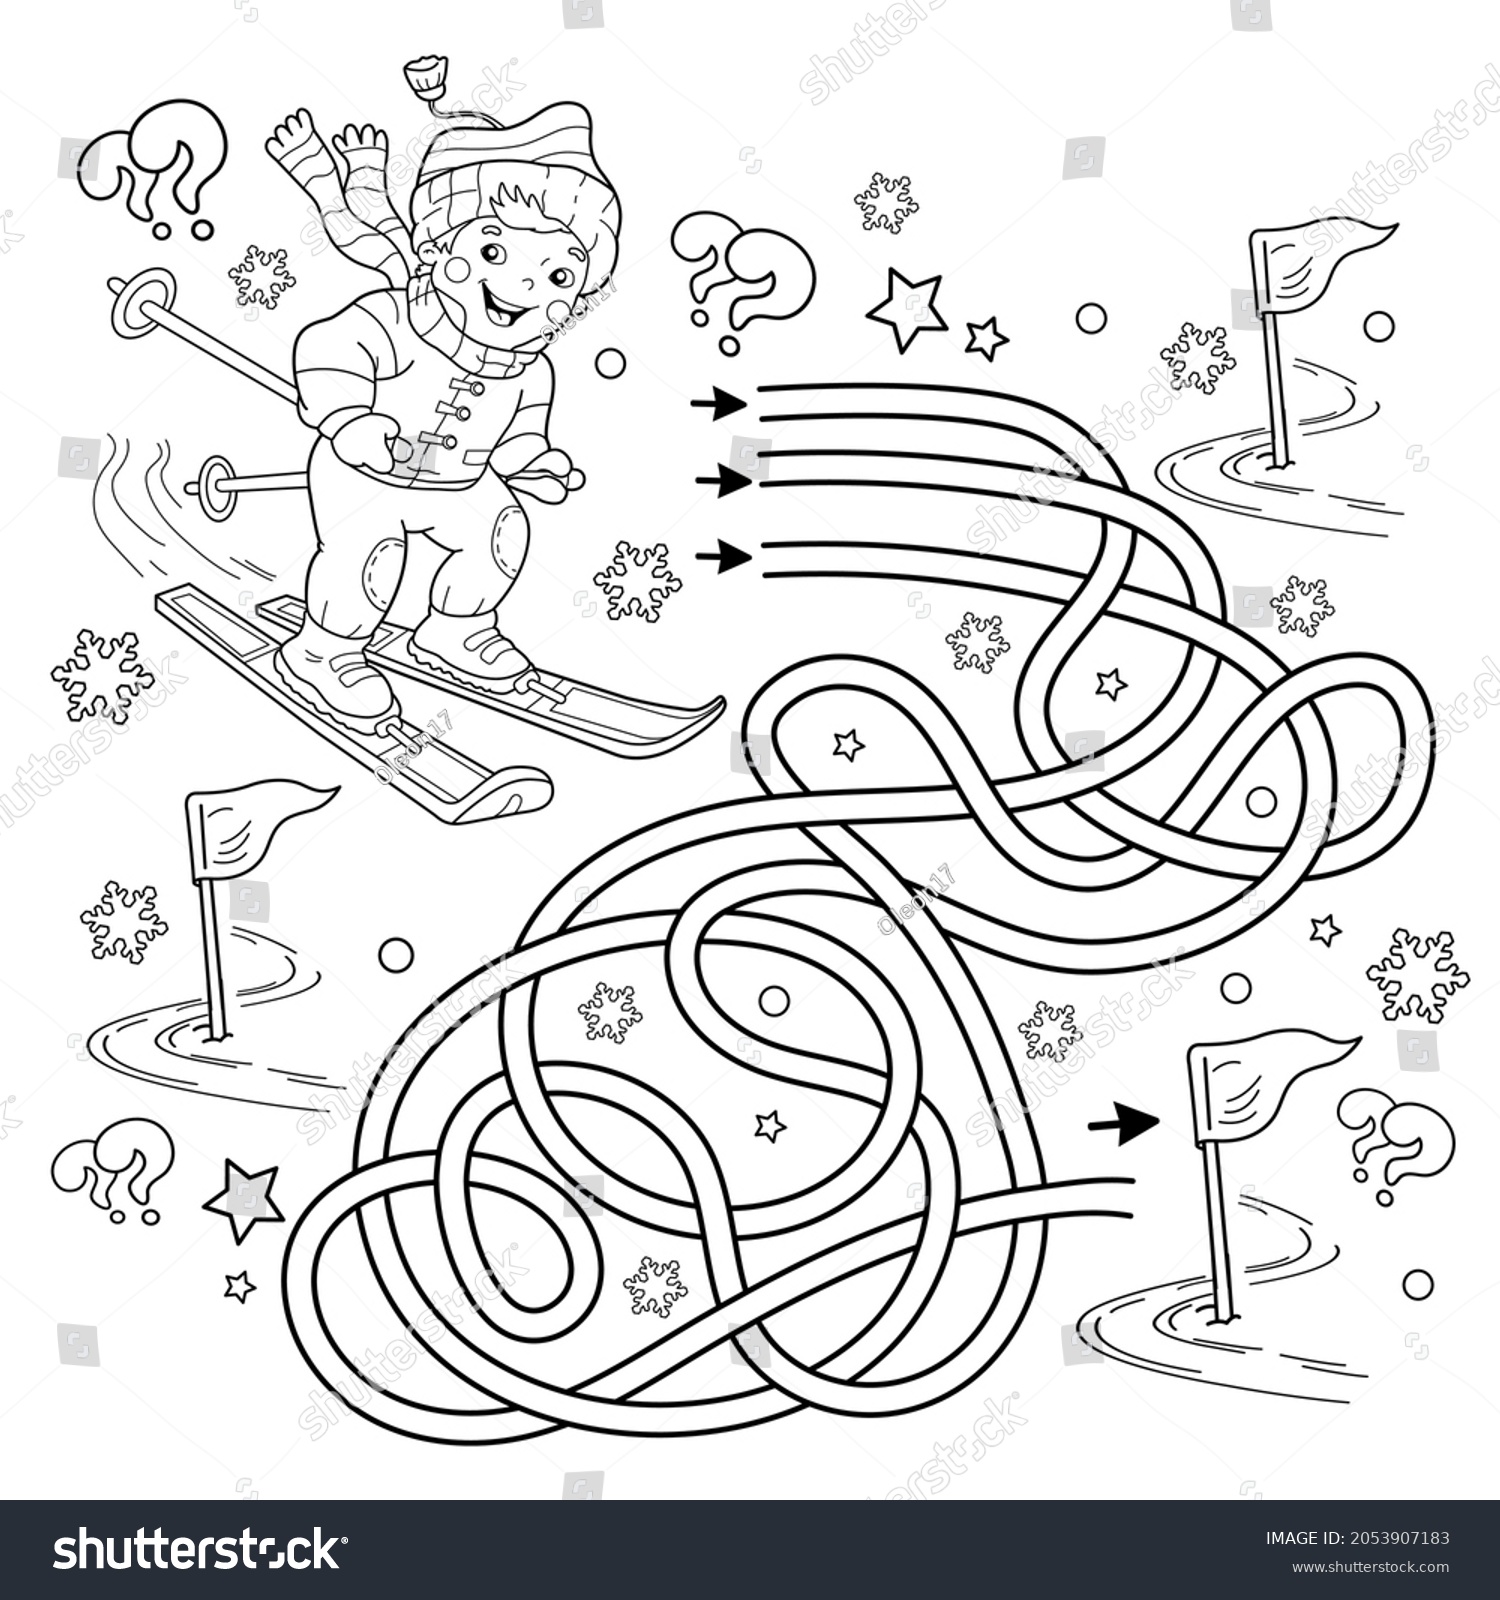 Maze labyrinth game puzzle tangled road stock vector royalty free